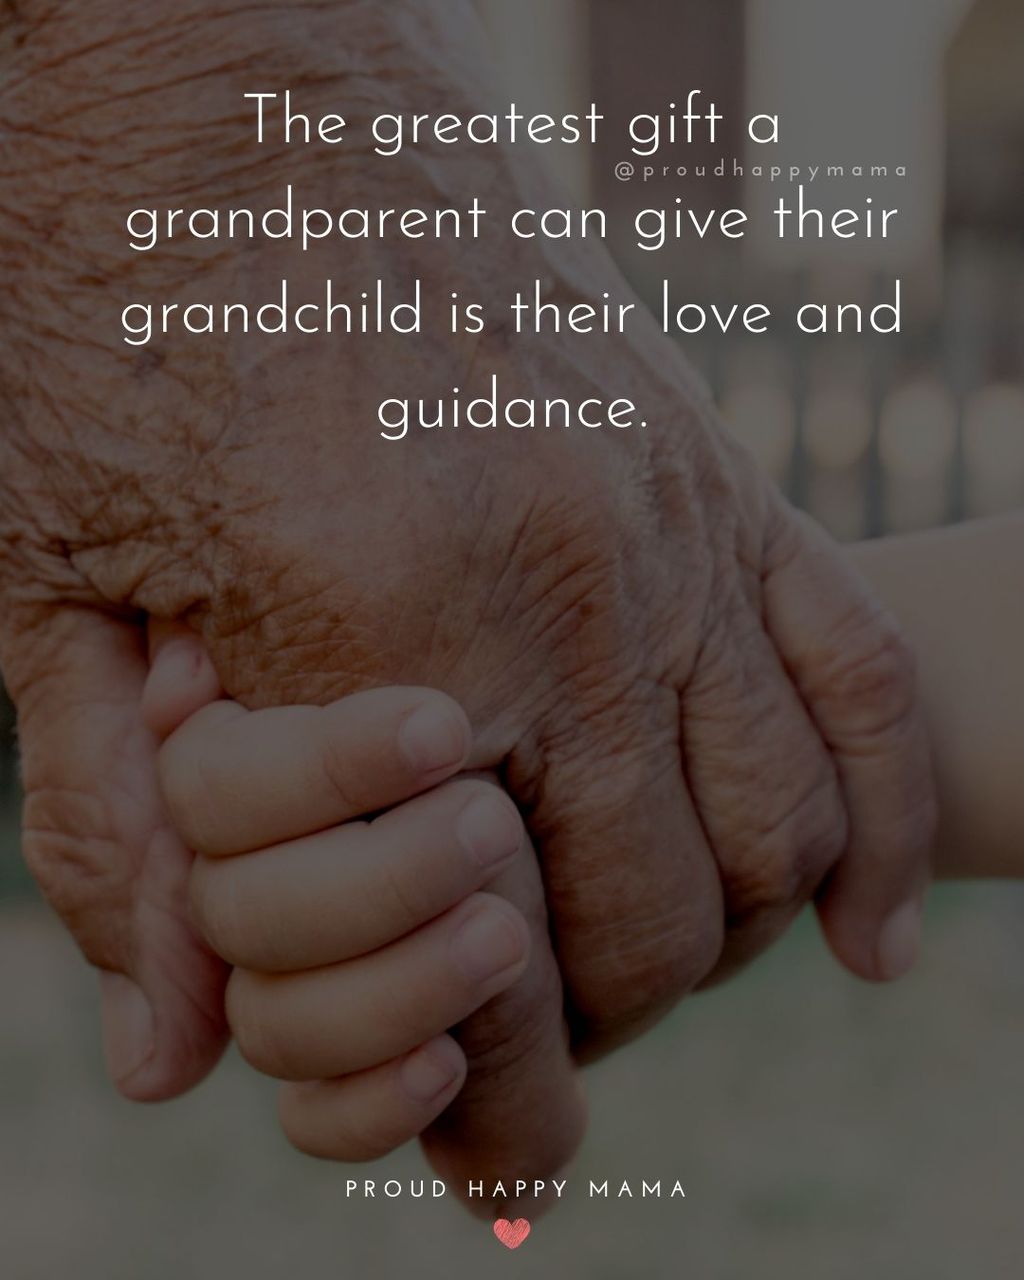 Grandson Quotes | The greatest gift a grandparent can give their grandchild is their love and guidance.